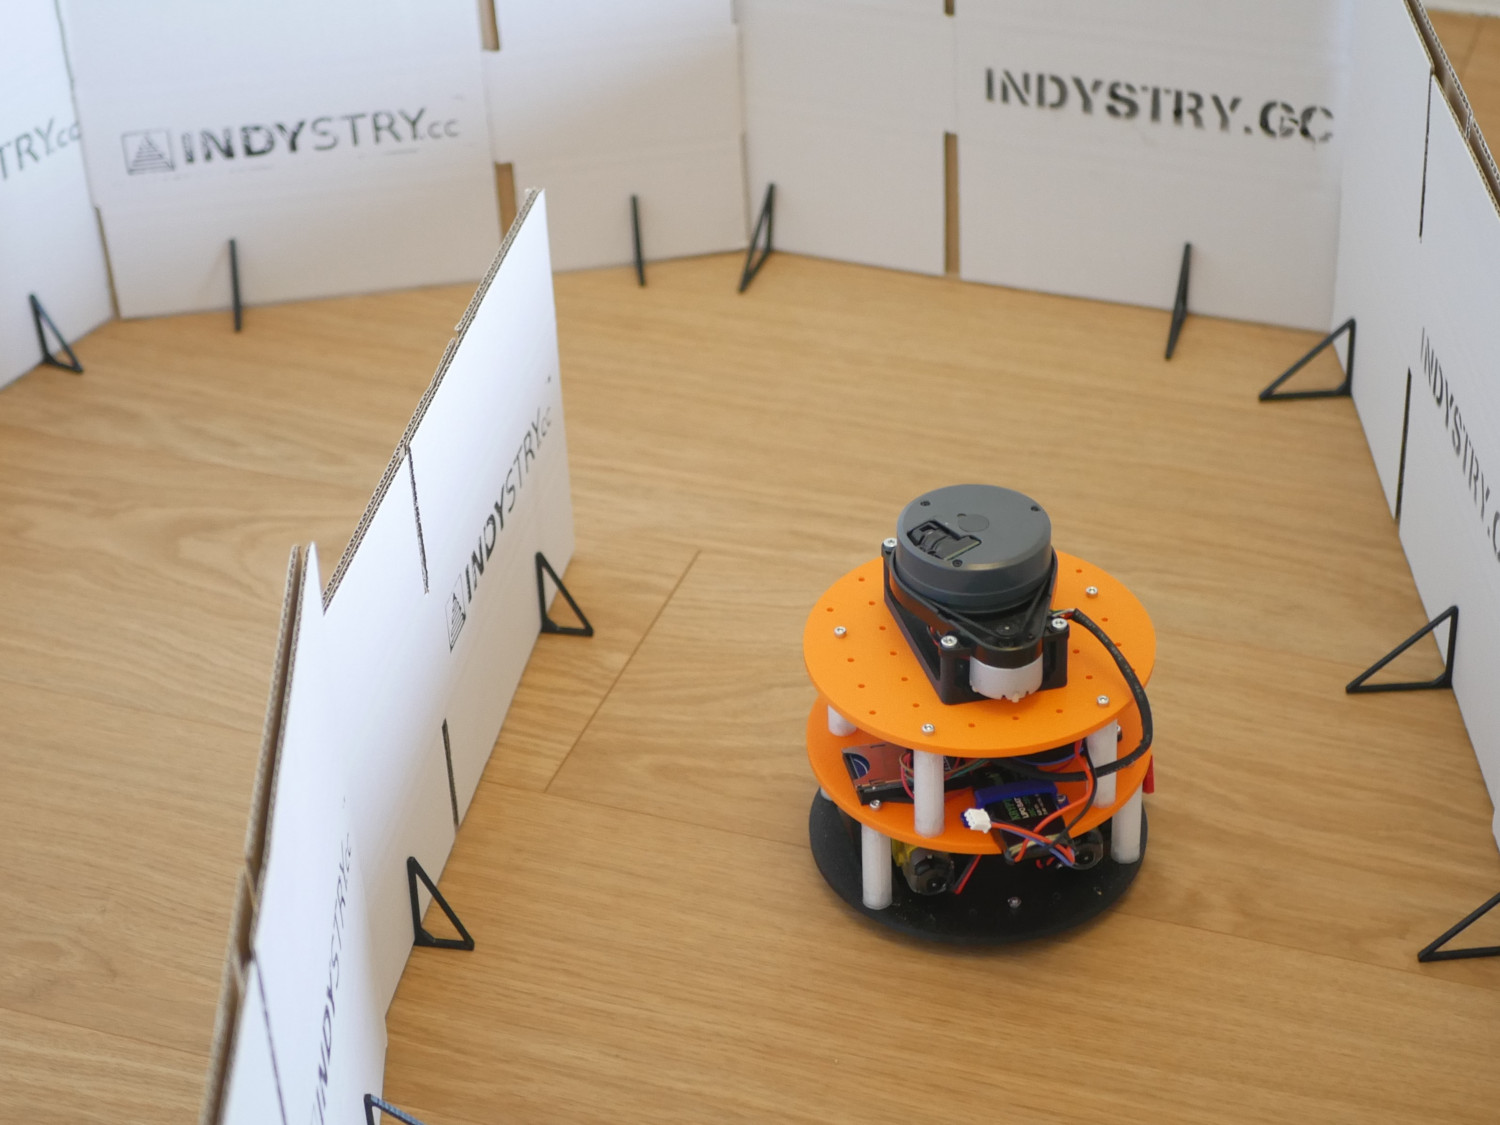 Machine learning robot with LIDAR